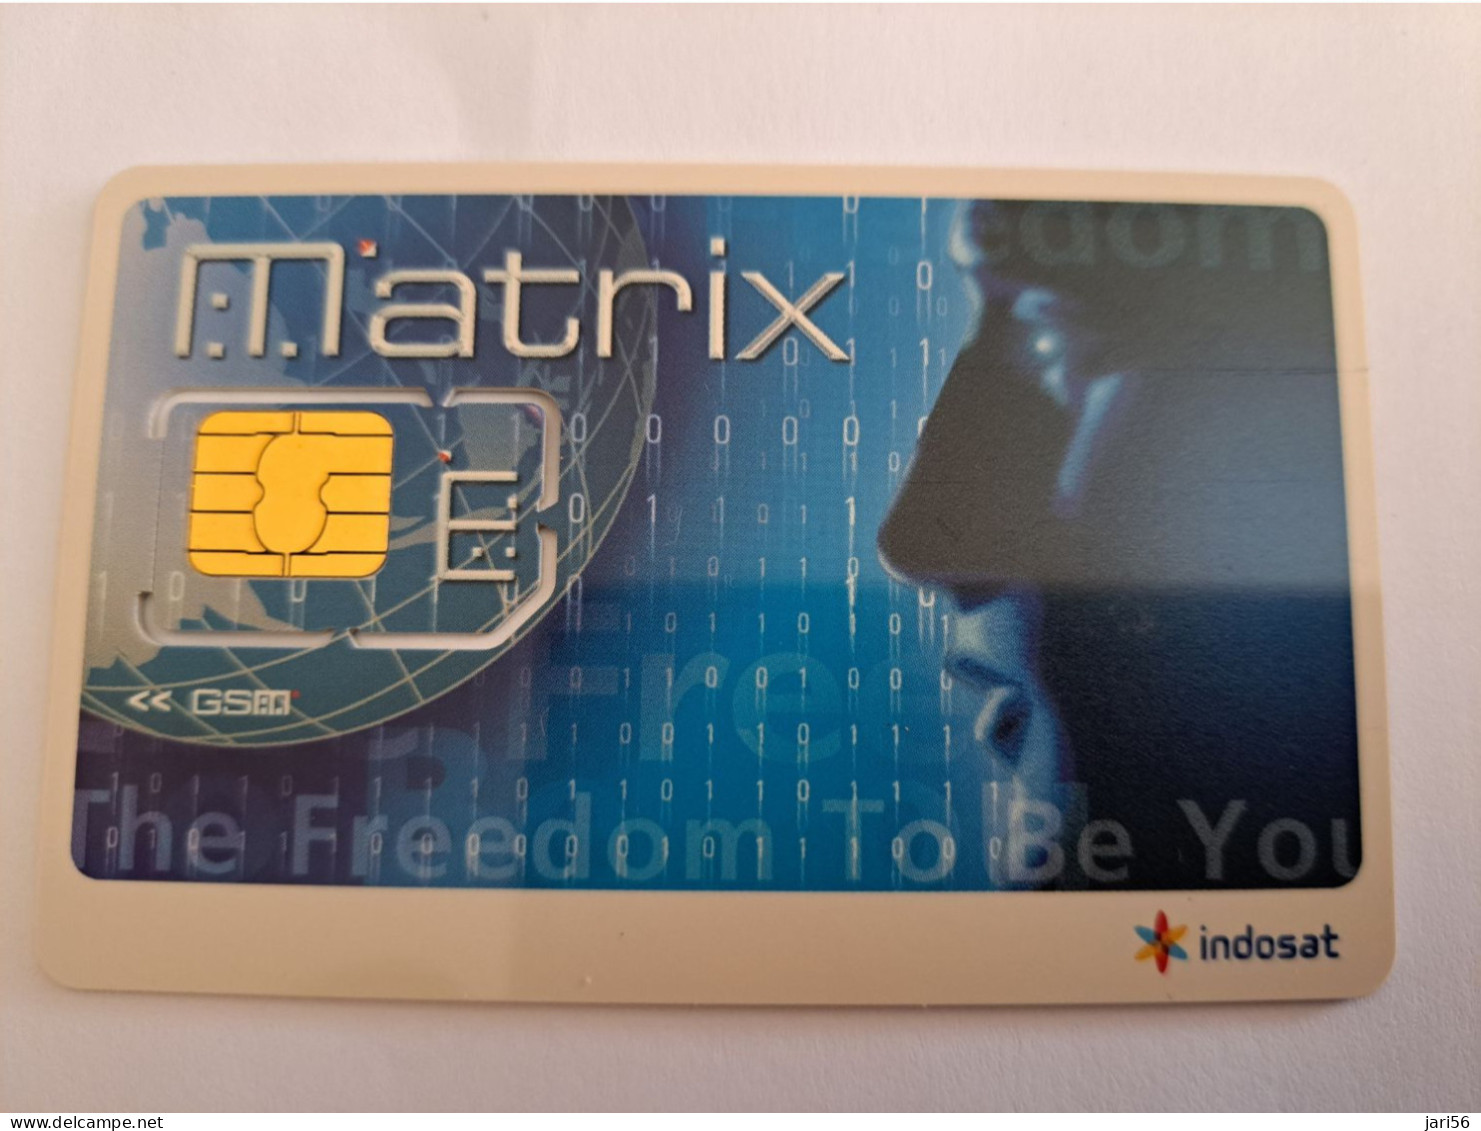 INDONESIA  GSM PREPAID/ CHIP / MATRIX/ THE FREEDOM TO BE YOU    INDOSAT  MINT CARD    **13462 ** - Indonesia